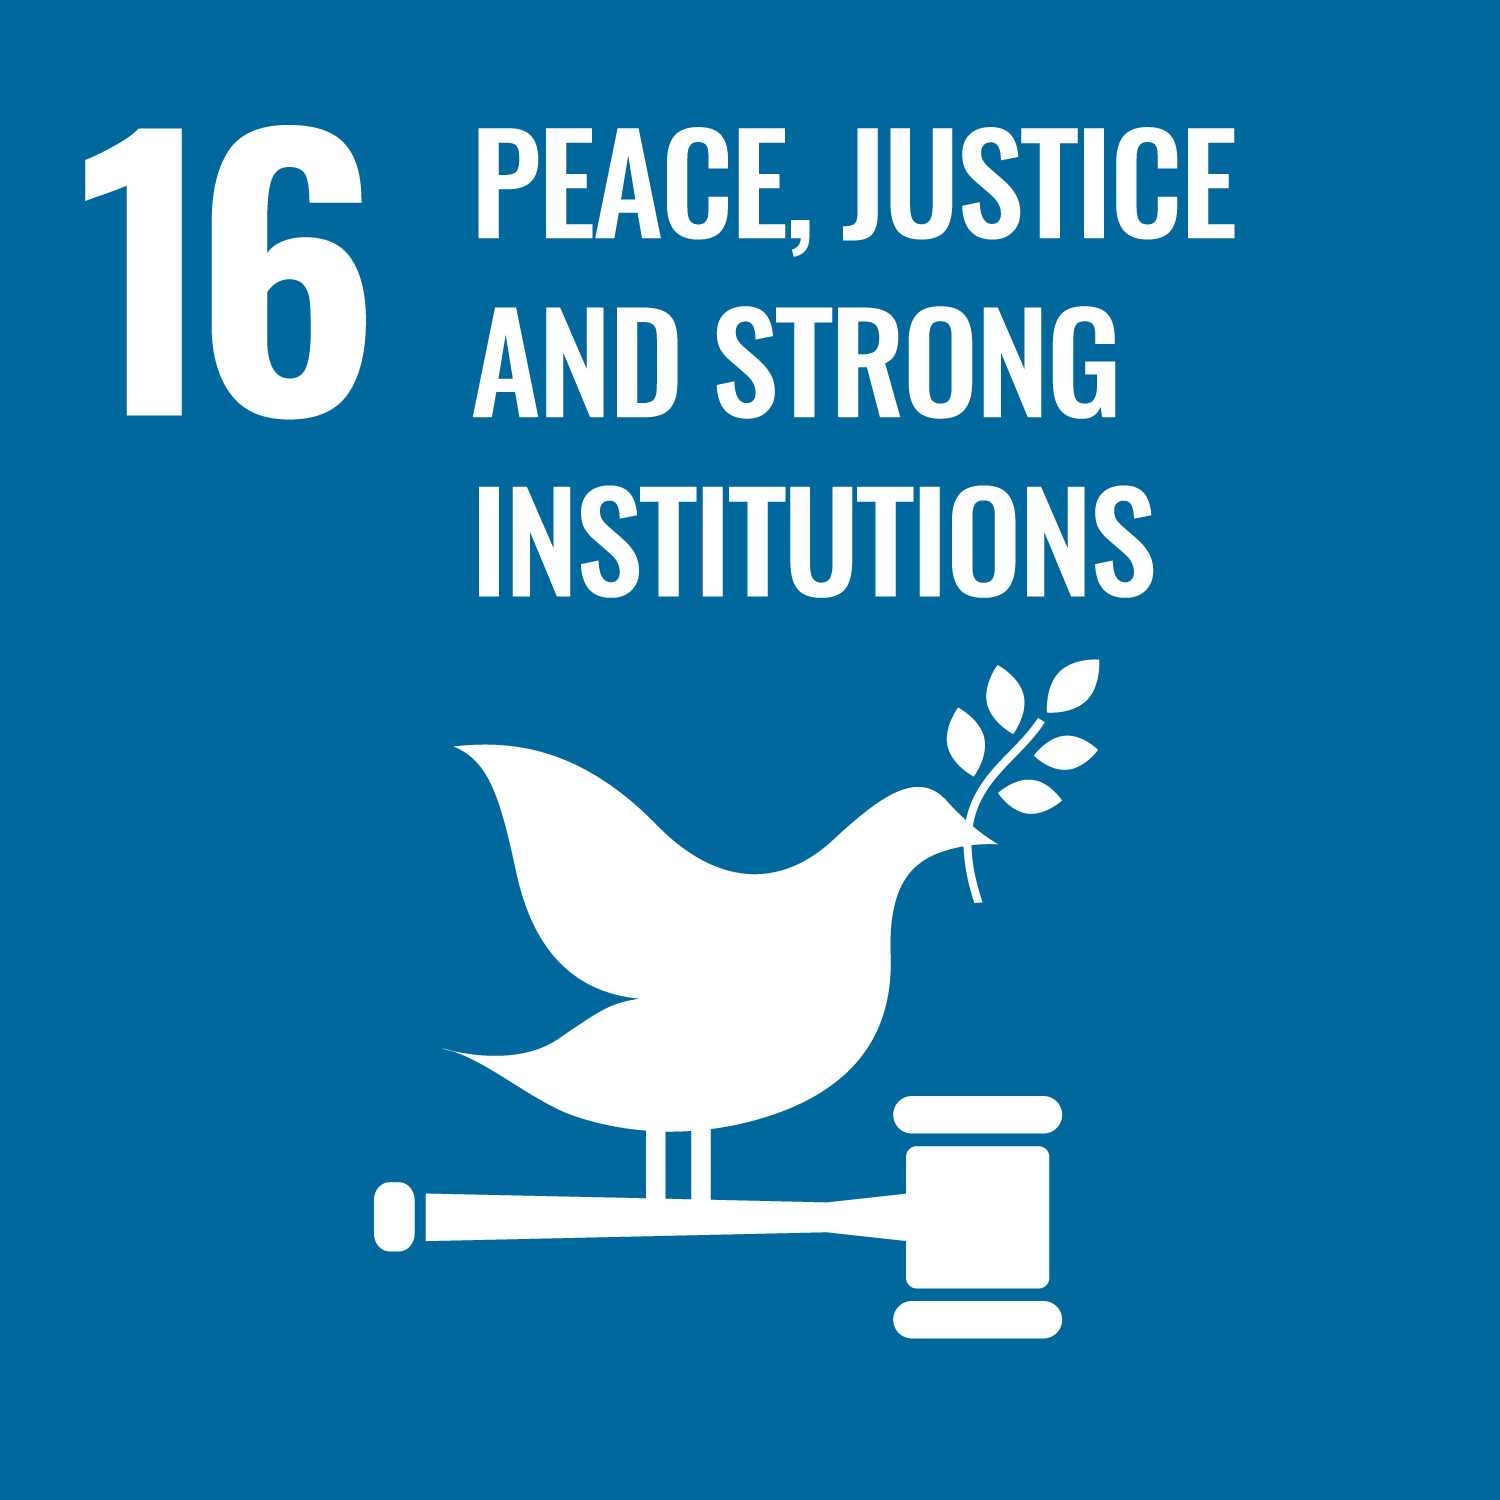 SDGs 16 PEACE, JUSTICE AND STRONG INSTITUTIONS